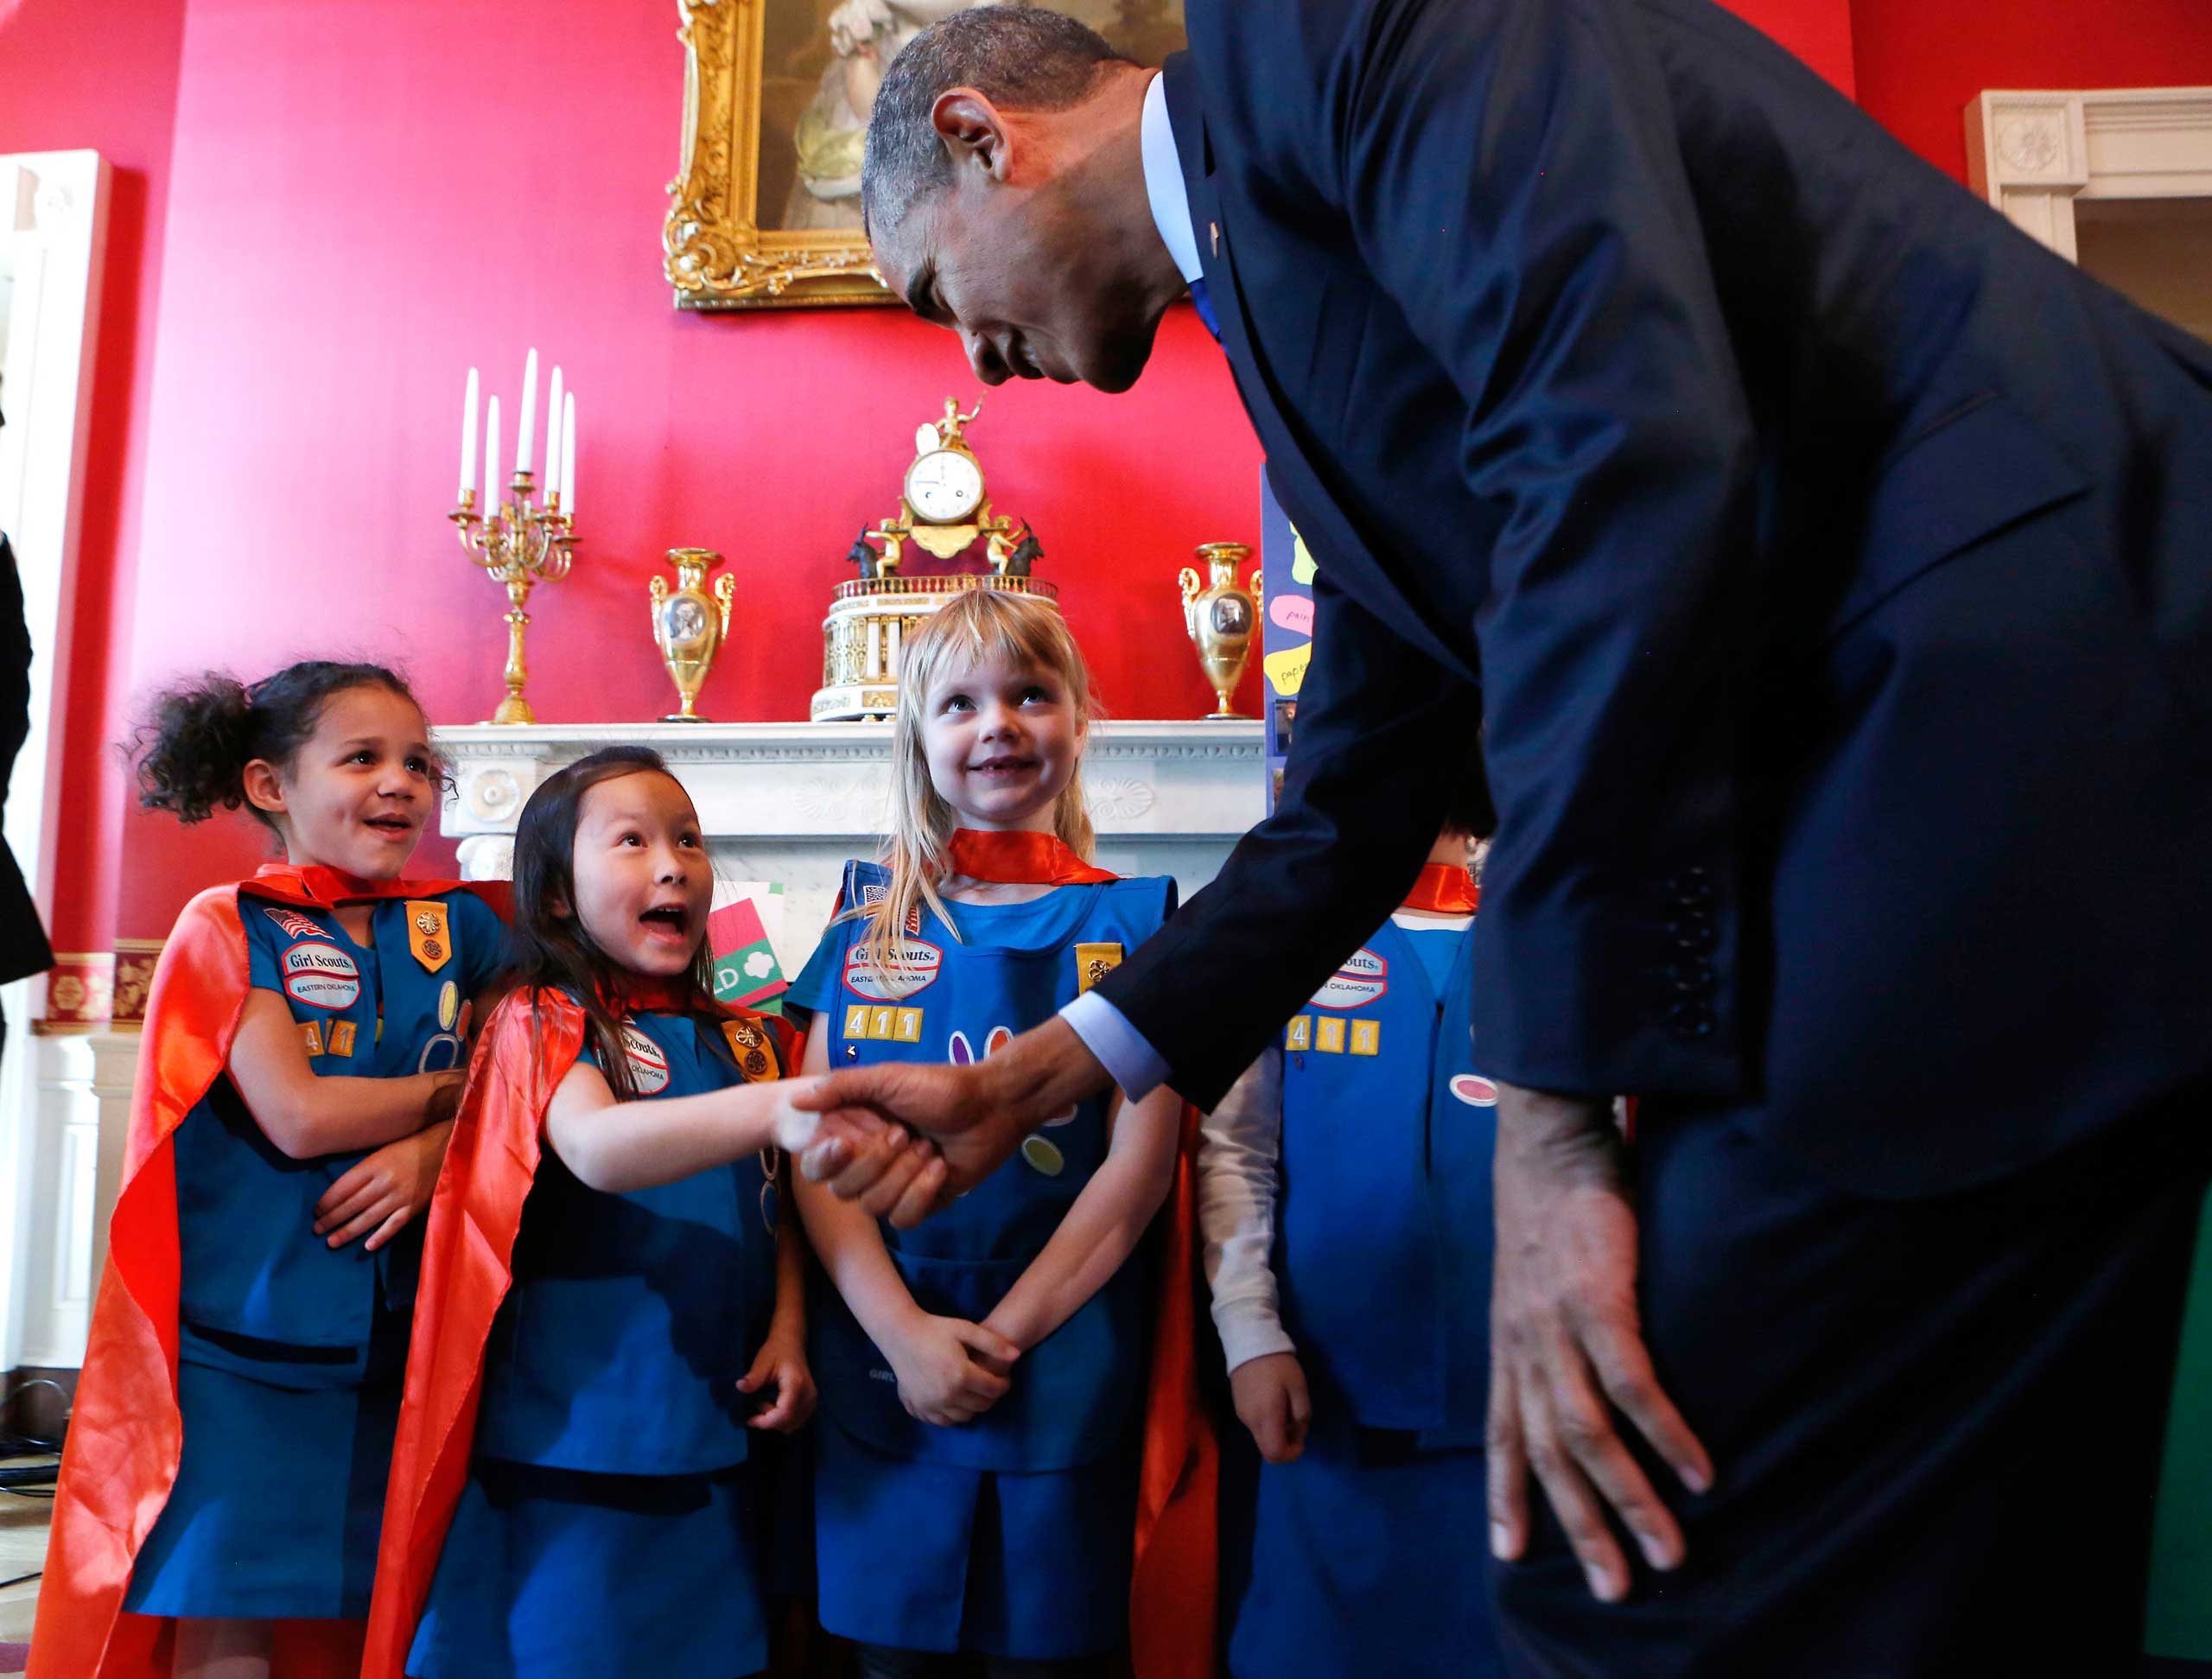 U.S. President Barack Obama (R) shakes hands with a group of  six-year-old Girls Scouts from Tulsa Oklahoma who designed a battery powered page turner to help people who are paralyzed or have arthritis at the 2015 White House Science Fair in Washington on March 23, 2015. (Aude Guerrucci—Pool/Getty Images)